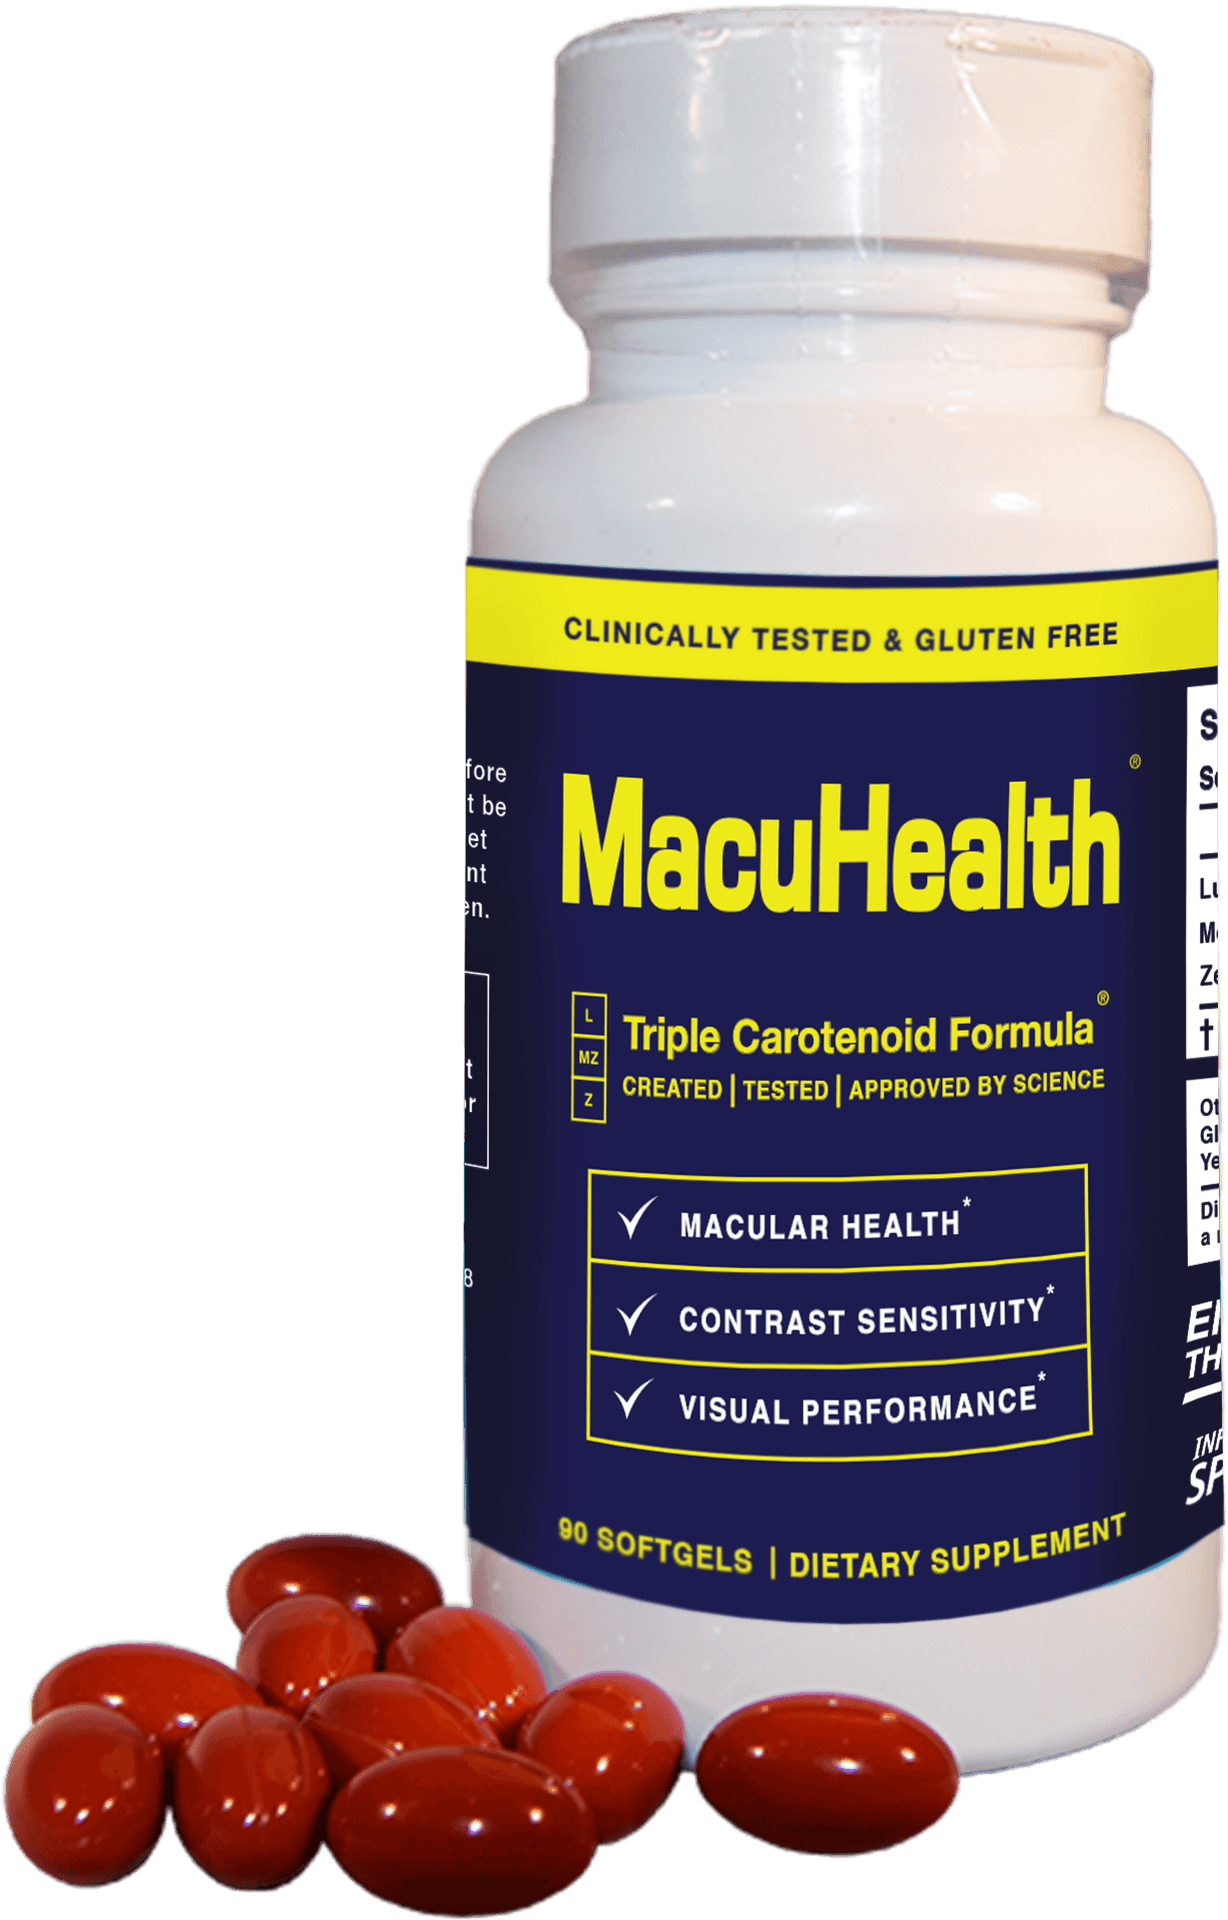 Macu Health Dietary Supplement Bottleand Capsules PNG